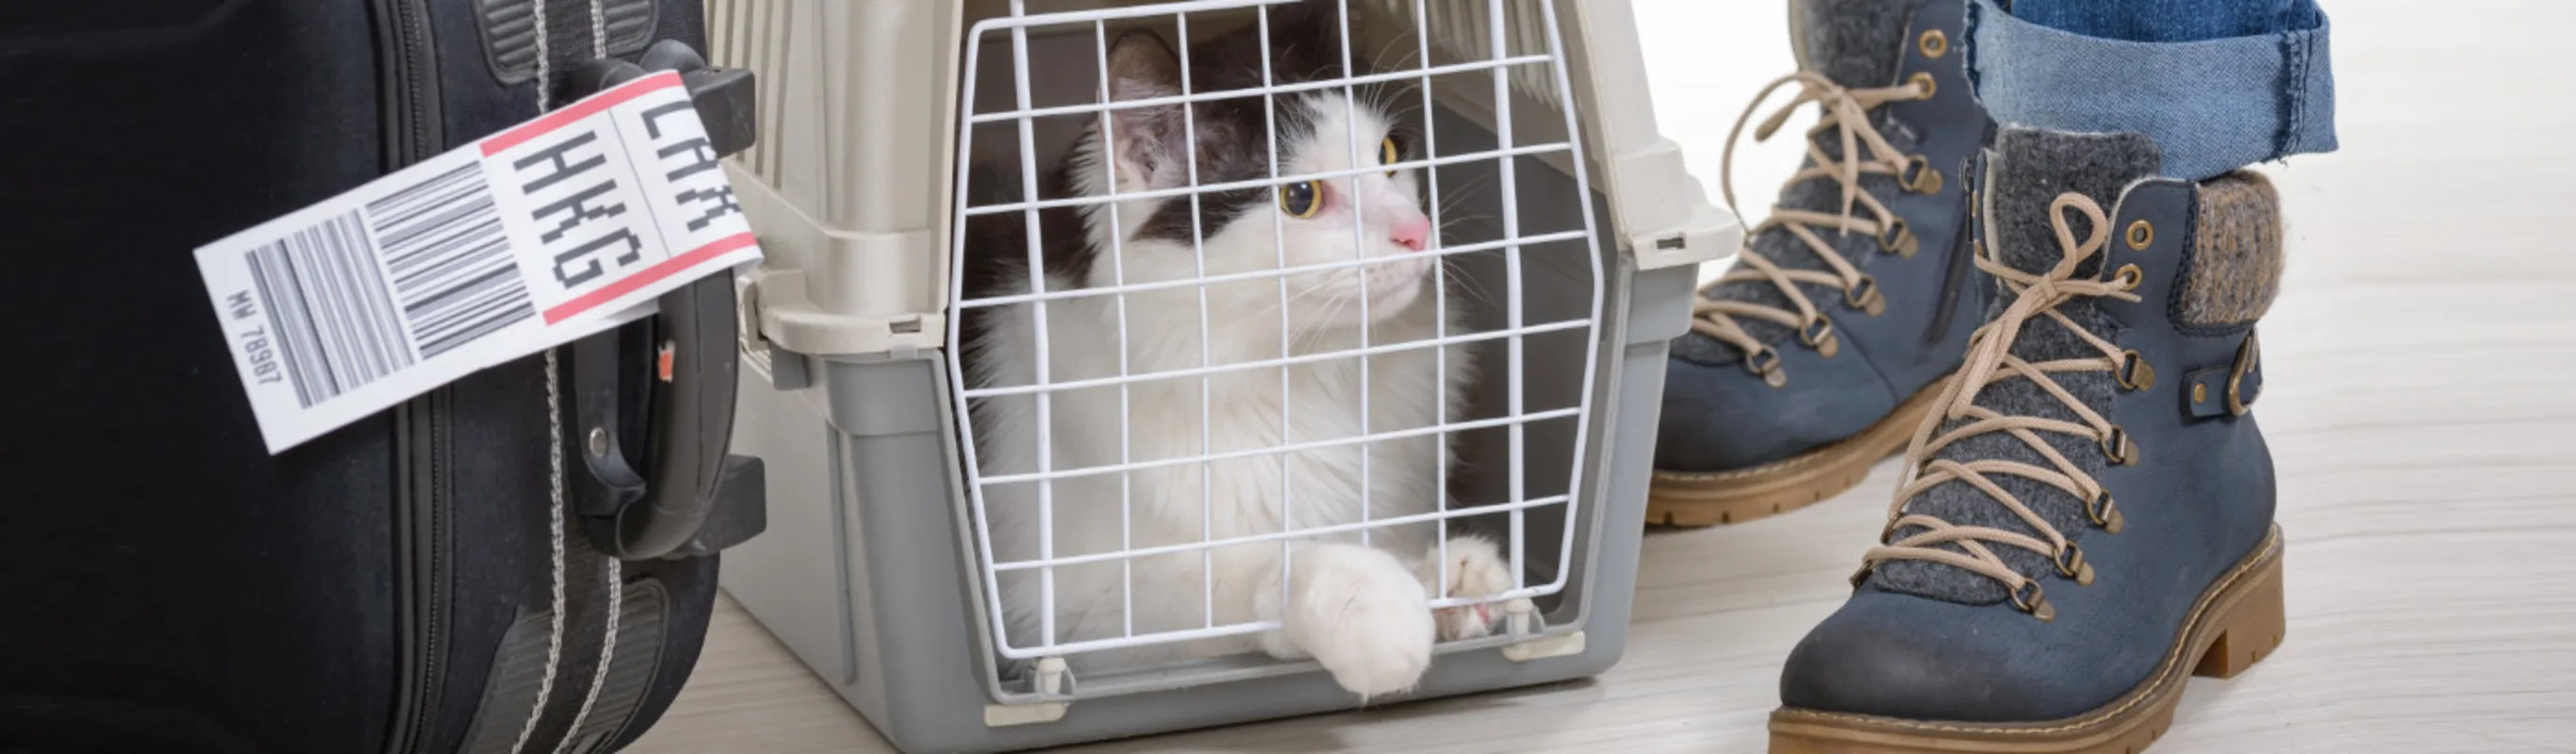 Cat in Carrier next to Owner and Suitcase